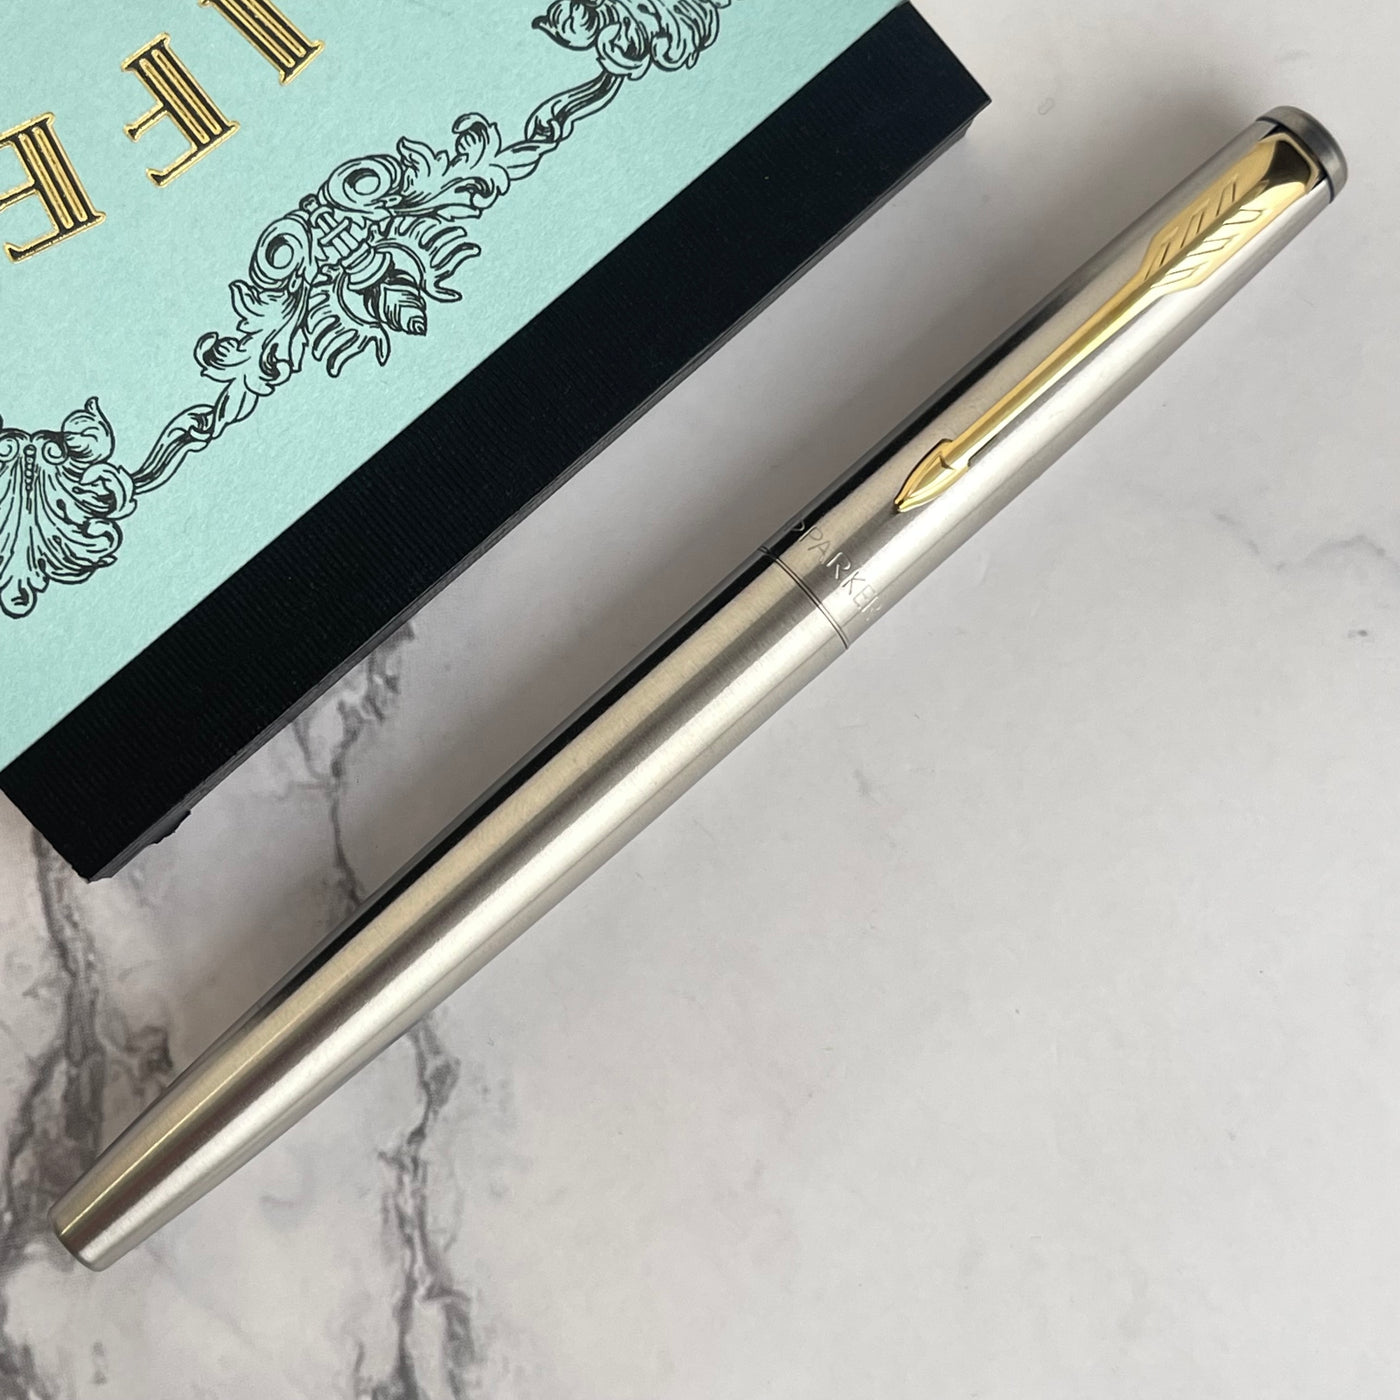 Parker Jotter Fountain Pen - Stainless Steel with Gold Trim